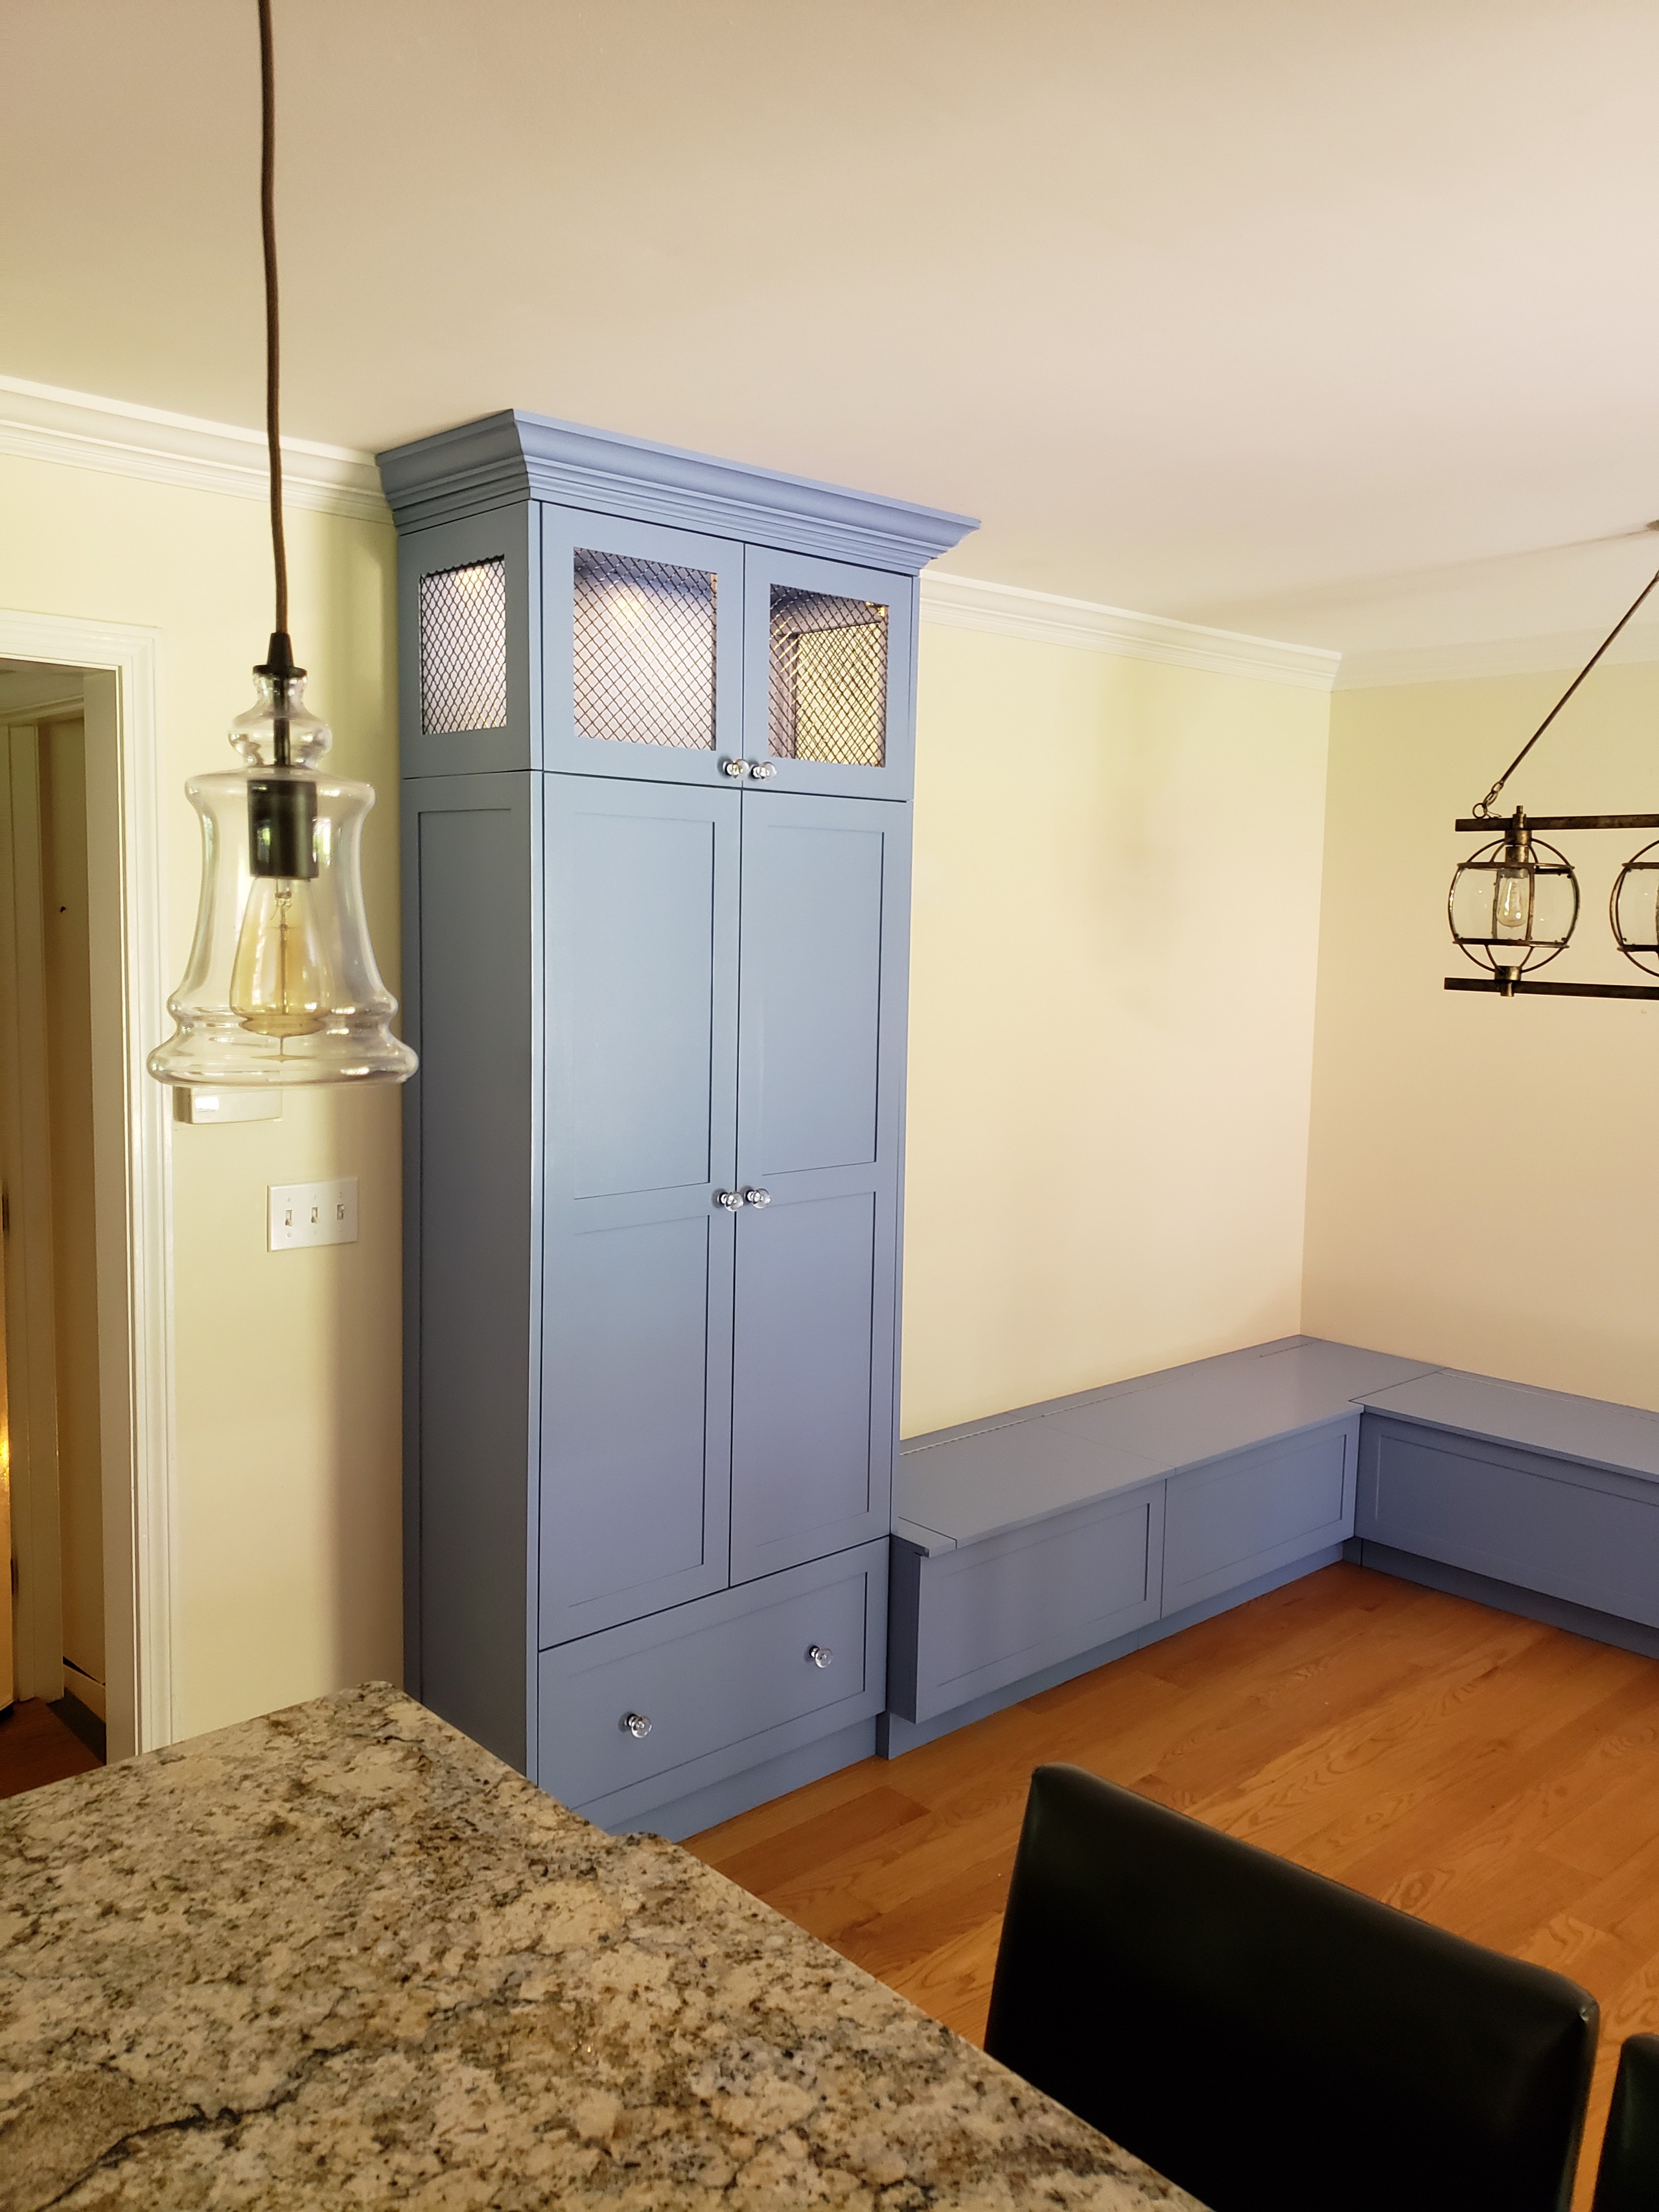 Steel Blue Banquette and storage unit